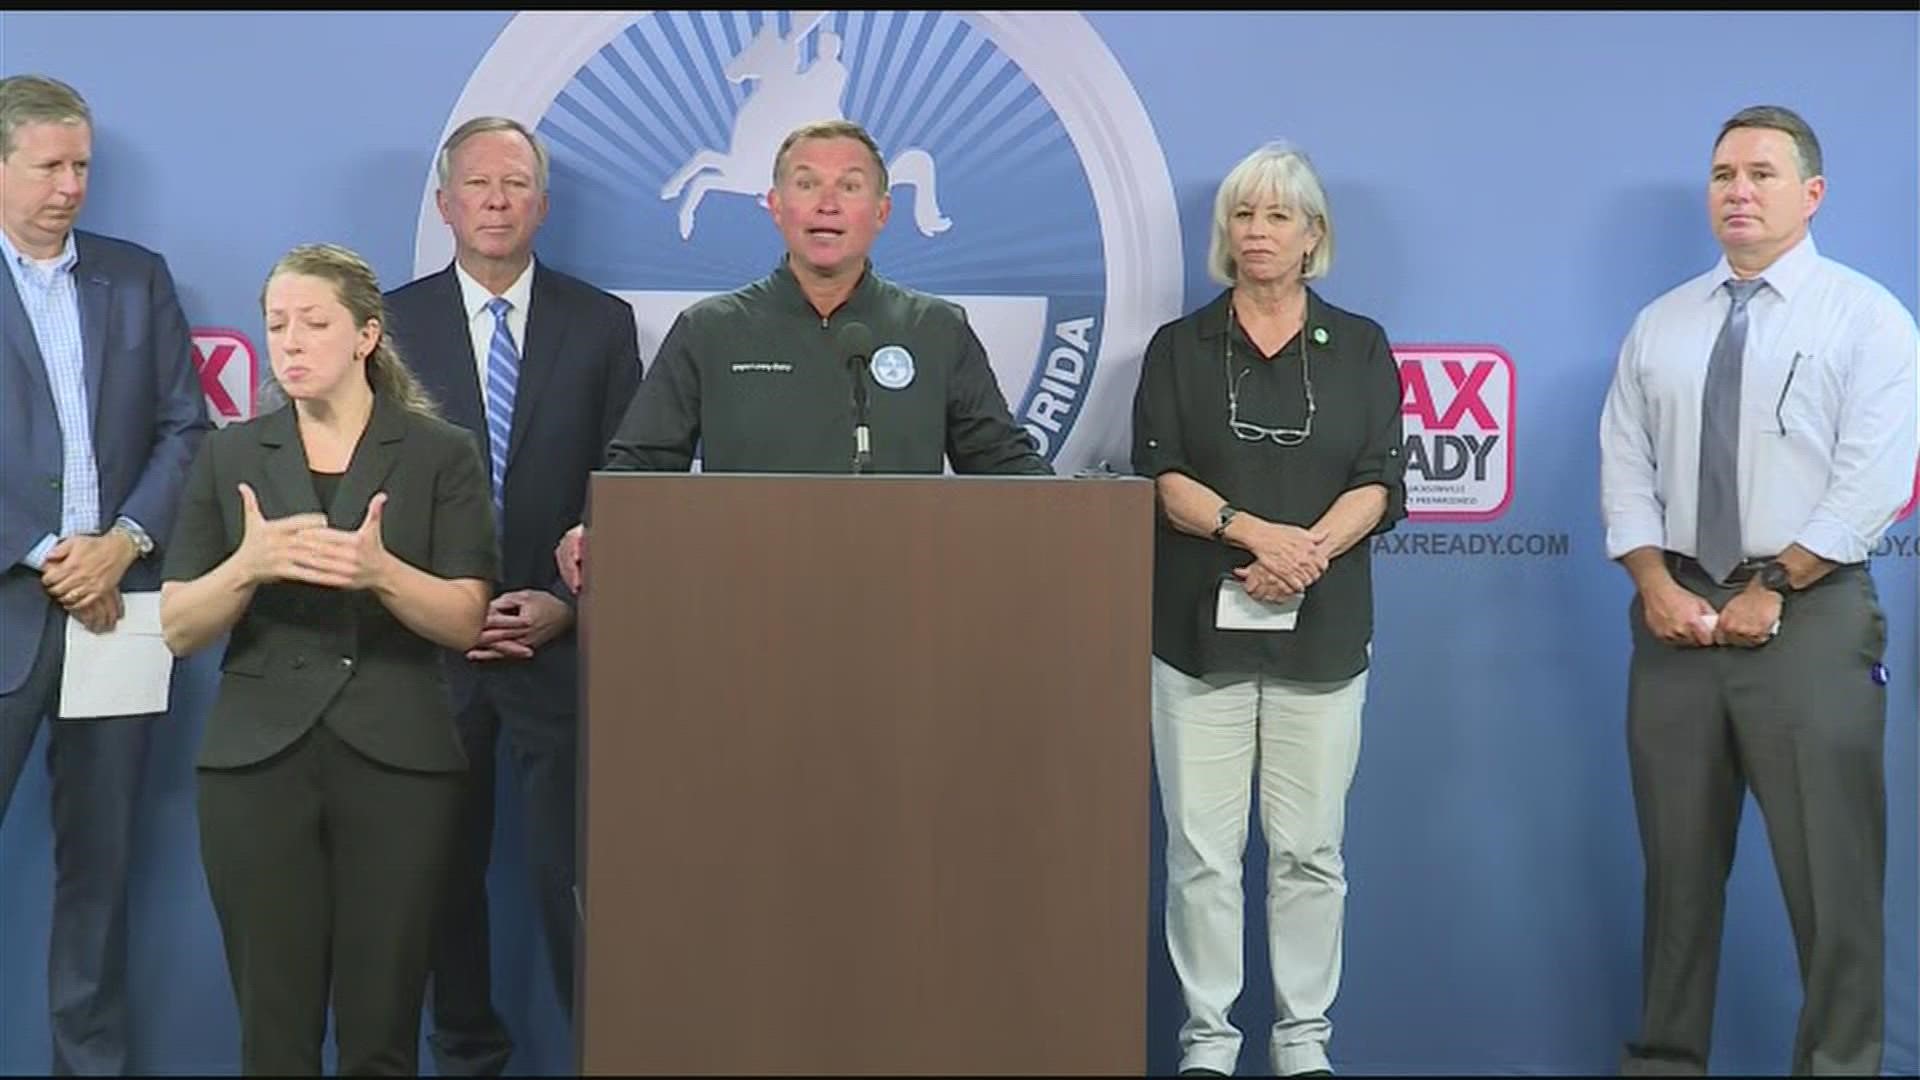 Mayor Curry said we should start seeing rain and wind starting this evening and into the morning.